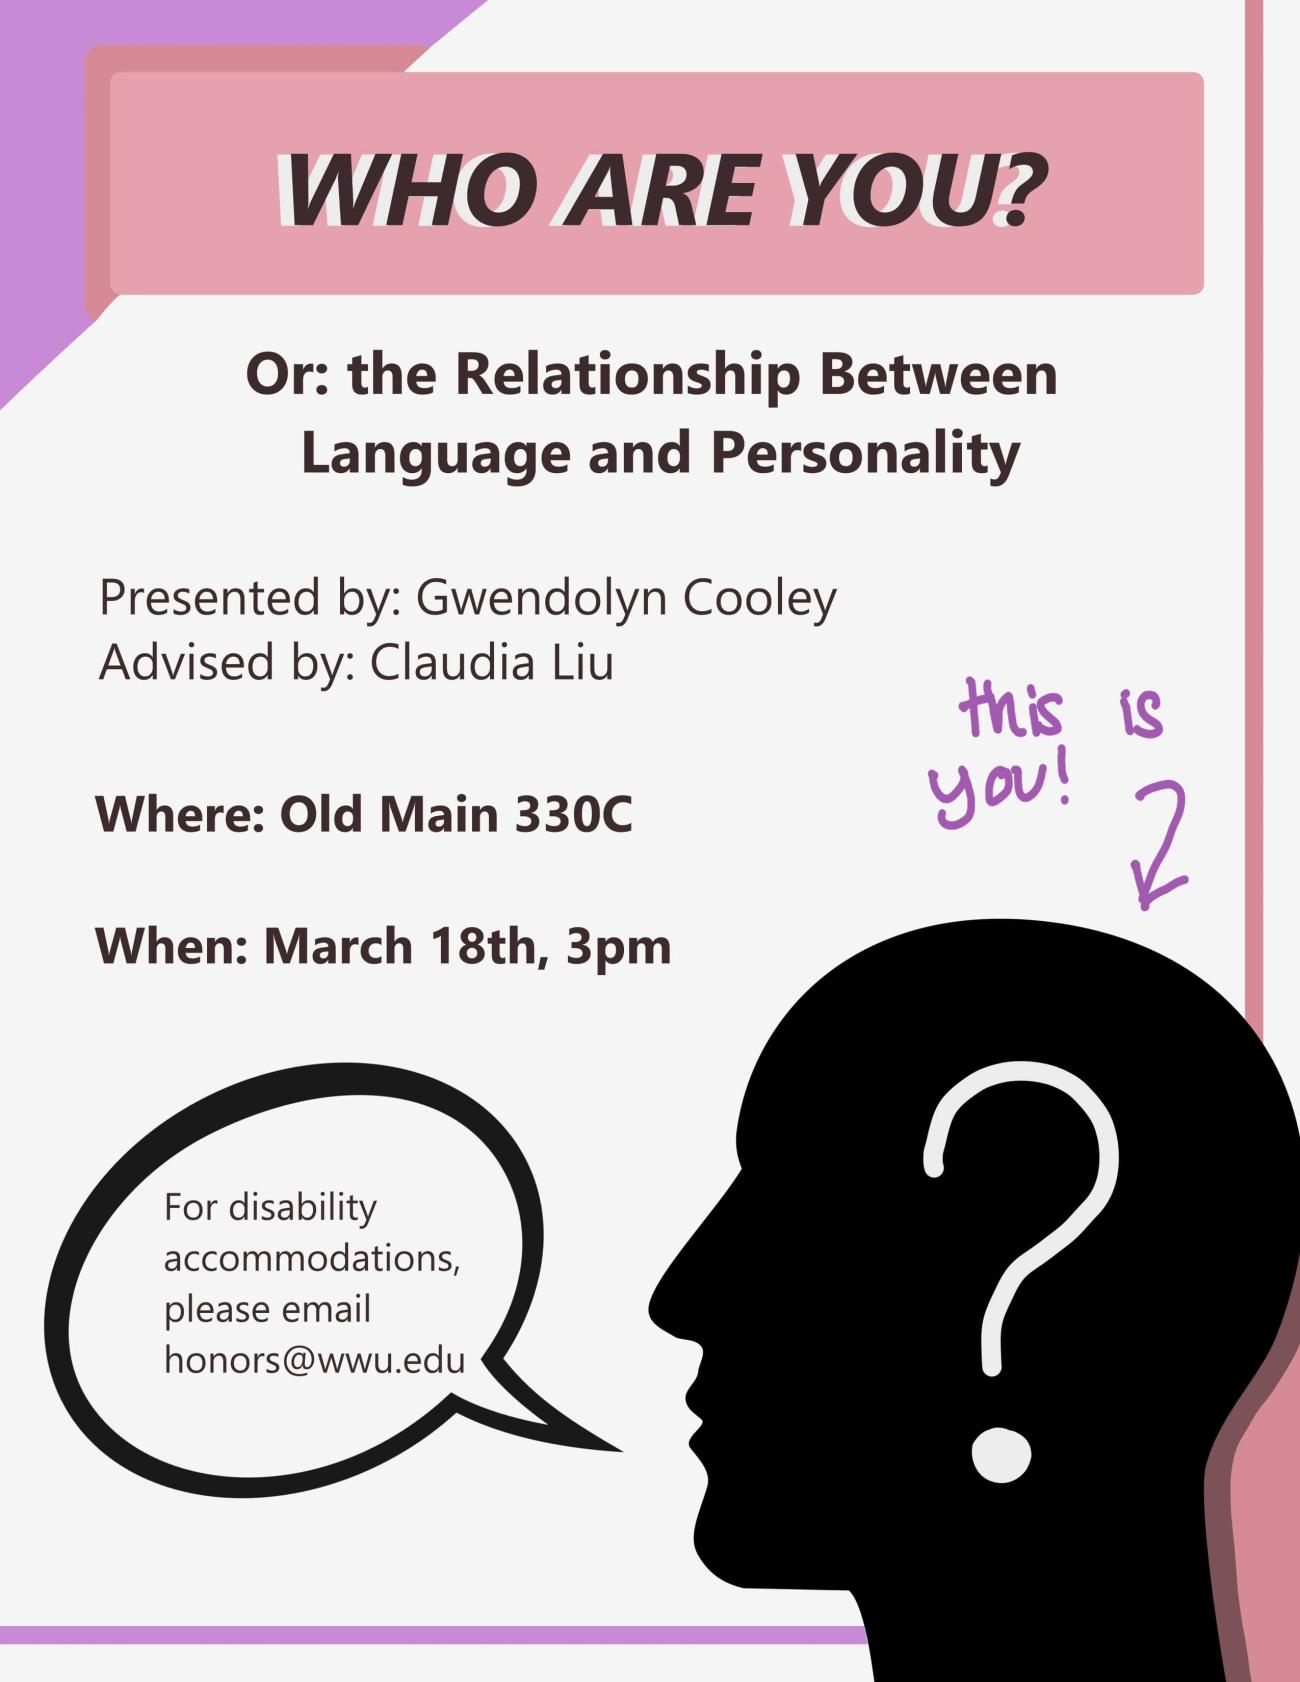 bottom right of the poster is a silhouette of a head with a white question mark laid over it. Accents of purple and pink run along the peripheries of the poster. The text reads "Who Are You? Or: the Relationship Between Language and Personality. Presented By: Gwendolyn Cooley. Advised By: Claudia Liu. Where: Old Main 330C. When: March 18th, 3pm". There is a speech bubble near the head that reads "For disability accommodations, please email honors@wwu.edu". An arrow points to the head "this is you!"